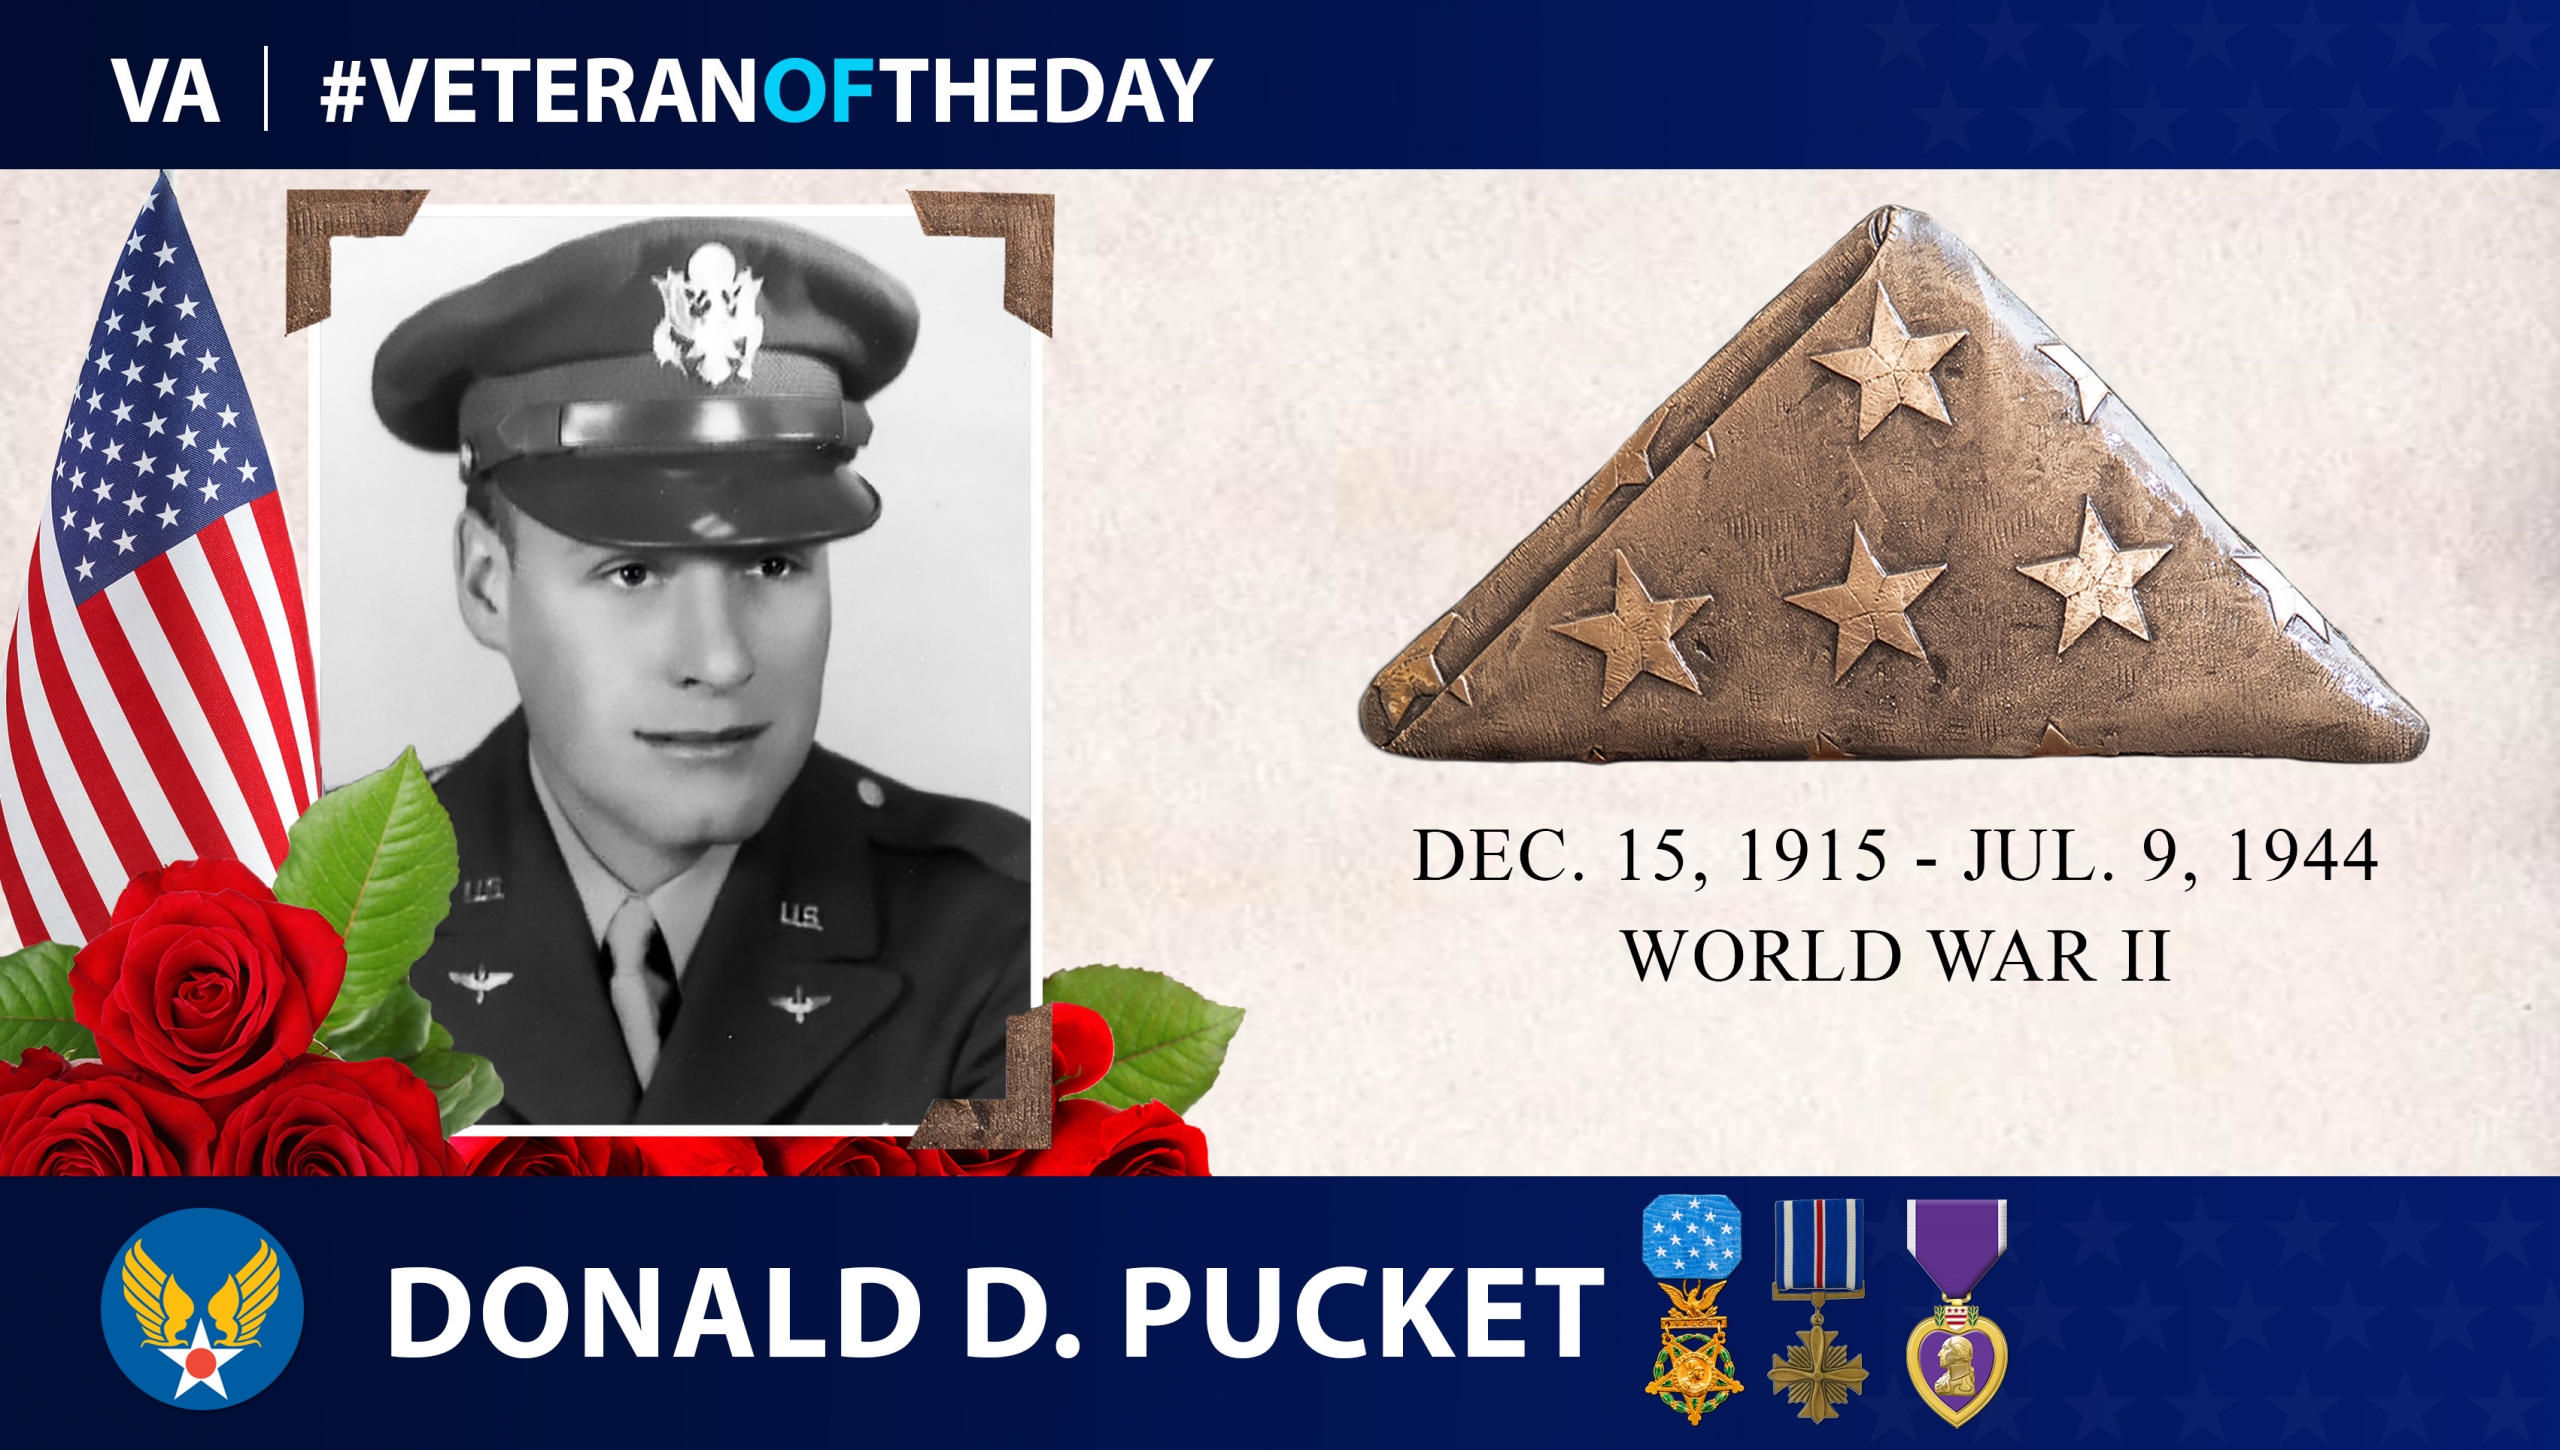 Army Air Corps Veteran Donald D. Pucket is today’s Veteran of the Day.